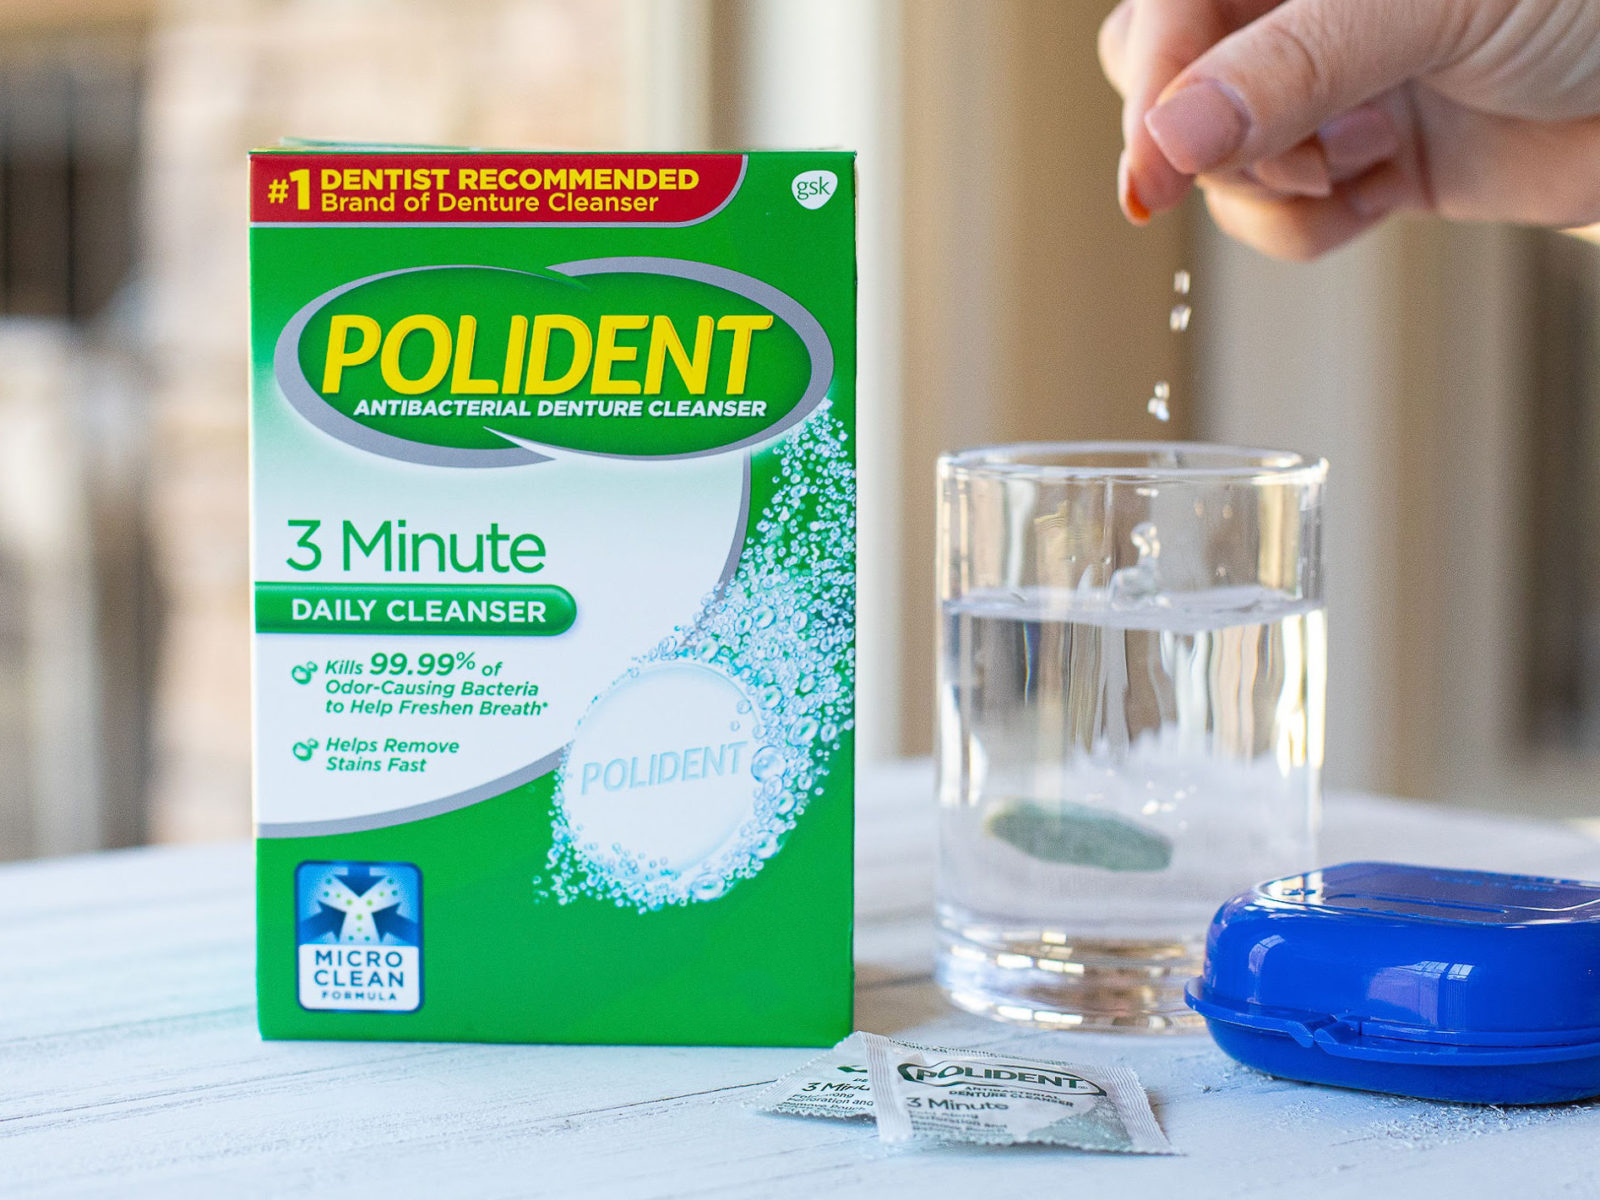 Polident Daily Cleanser As Low As $1.62 At Publix